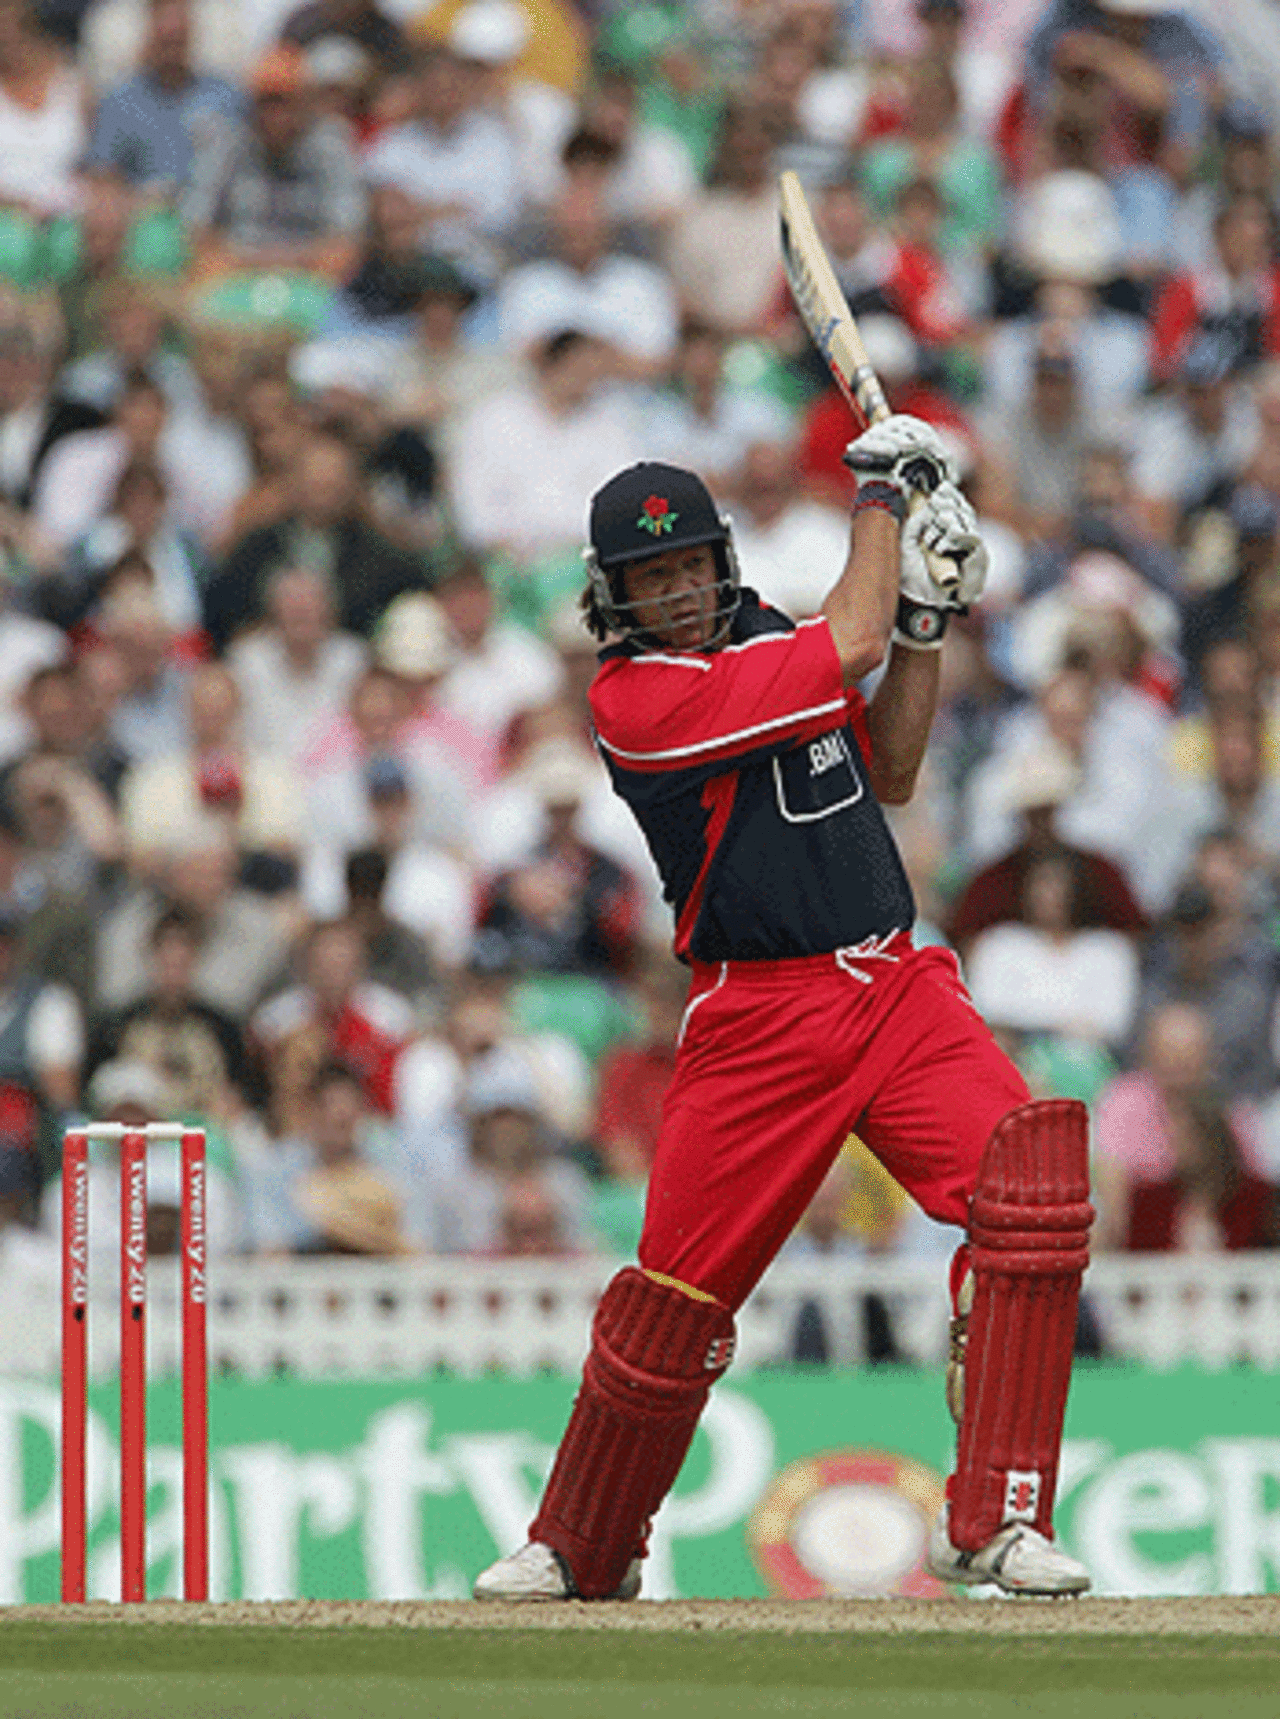 Andrew Symonds powers one through the covers in Twenty20 semi-final match between Surrey and Lancashire at The Oval on July 30, 2005